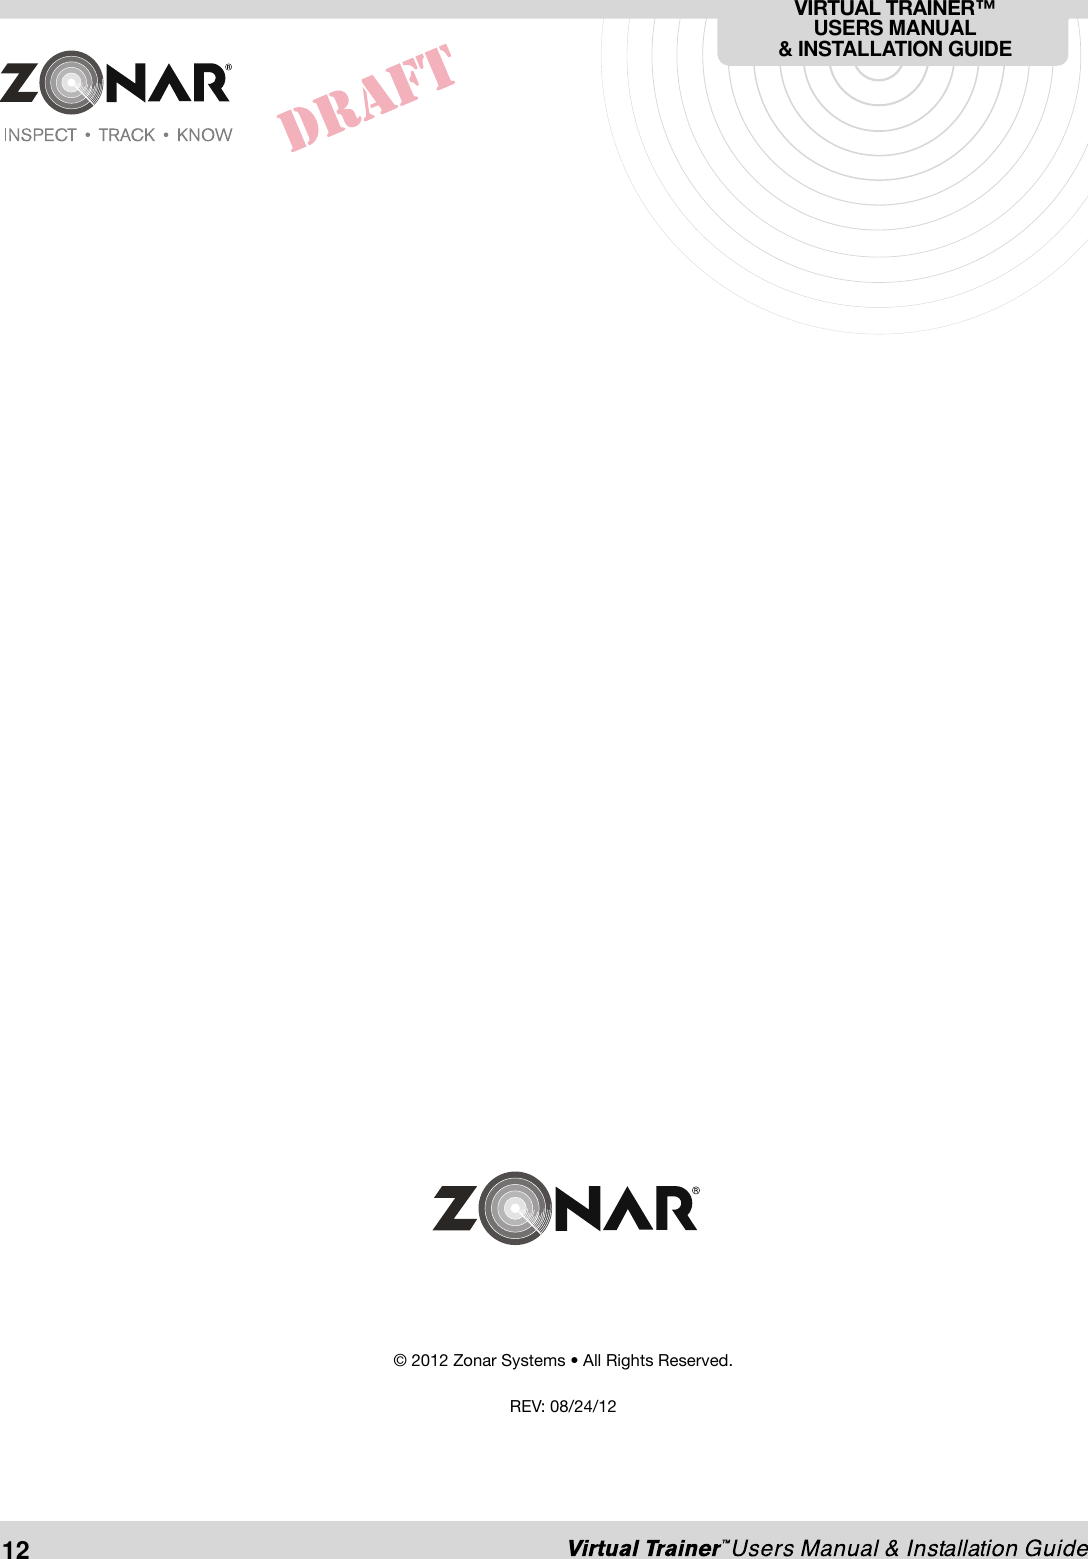 VIRTUAL TRAINER™USERS MANUAL&amp; INSTALLATION GUIDE12© 2012 Zonar Systems • All Rights Reserved.REV: 08/24/12